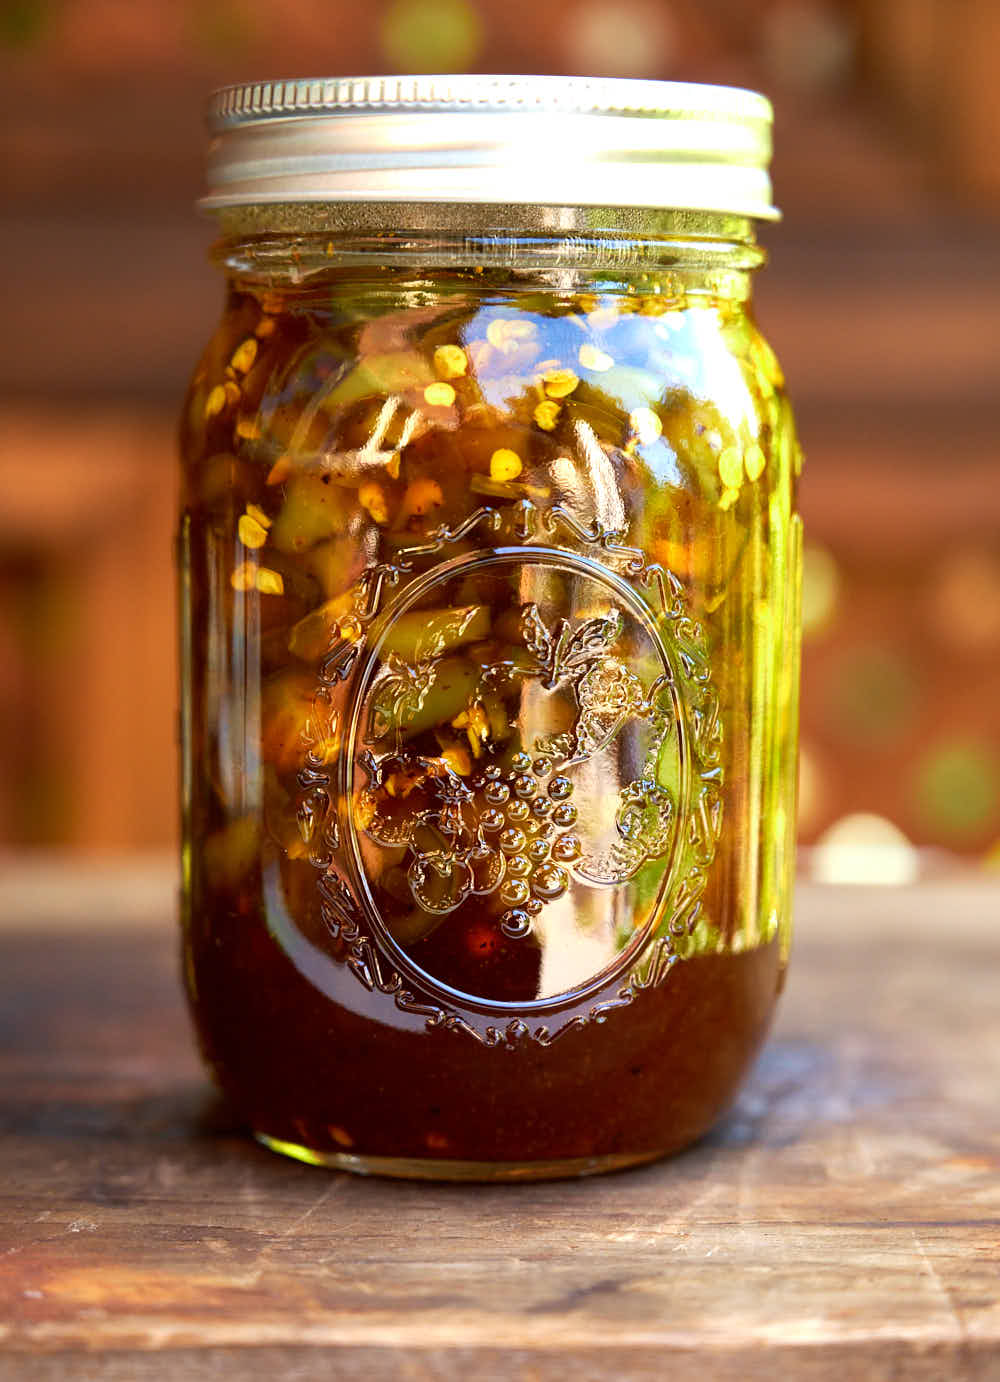 Canned cowboy candy (candied jalapenos)